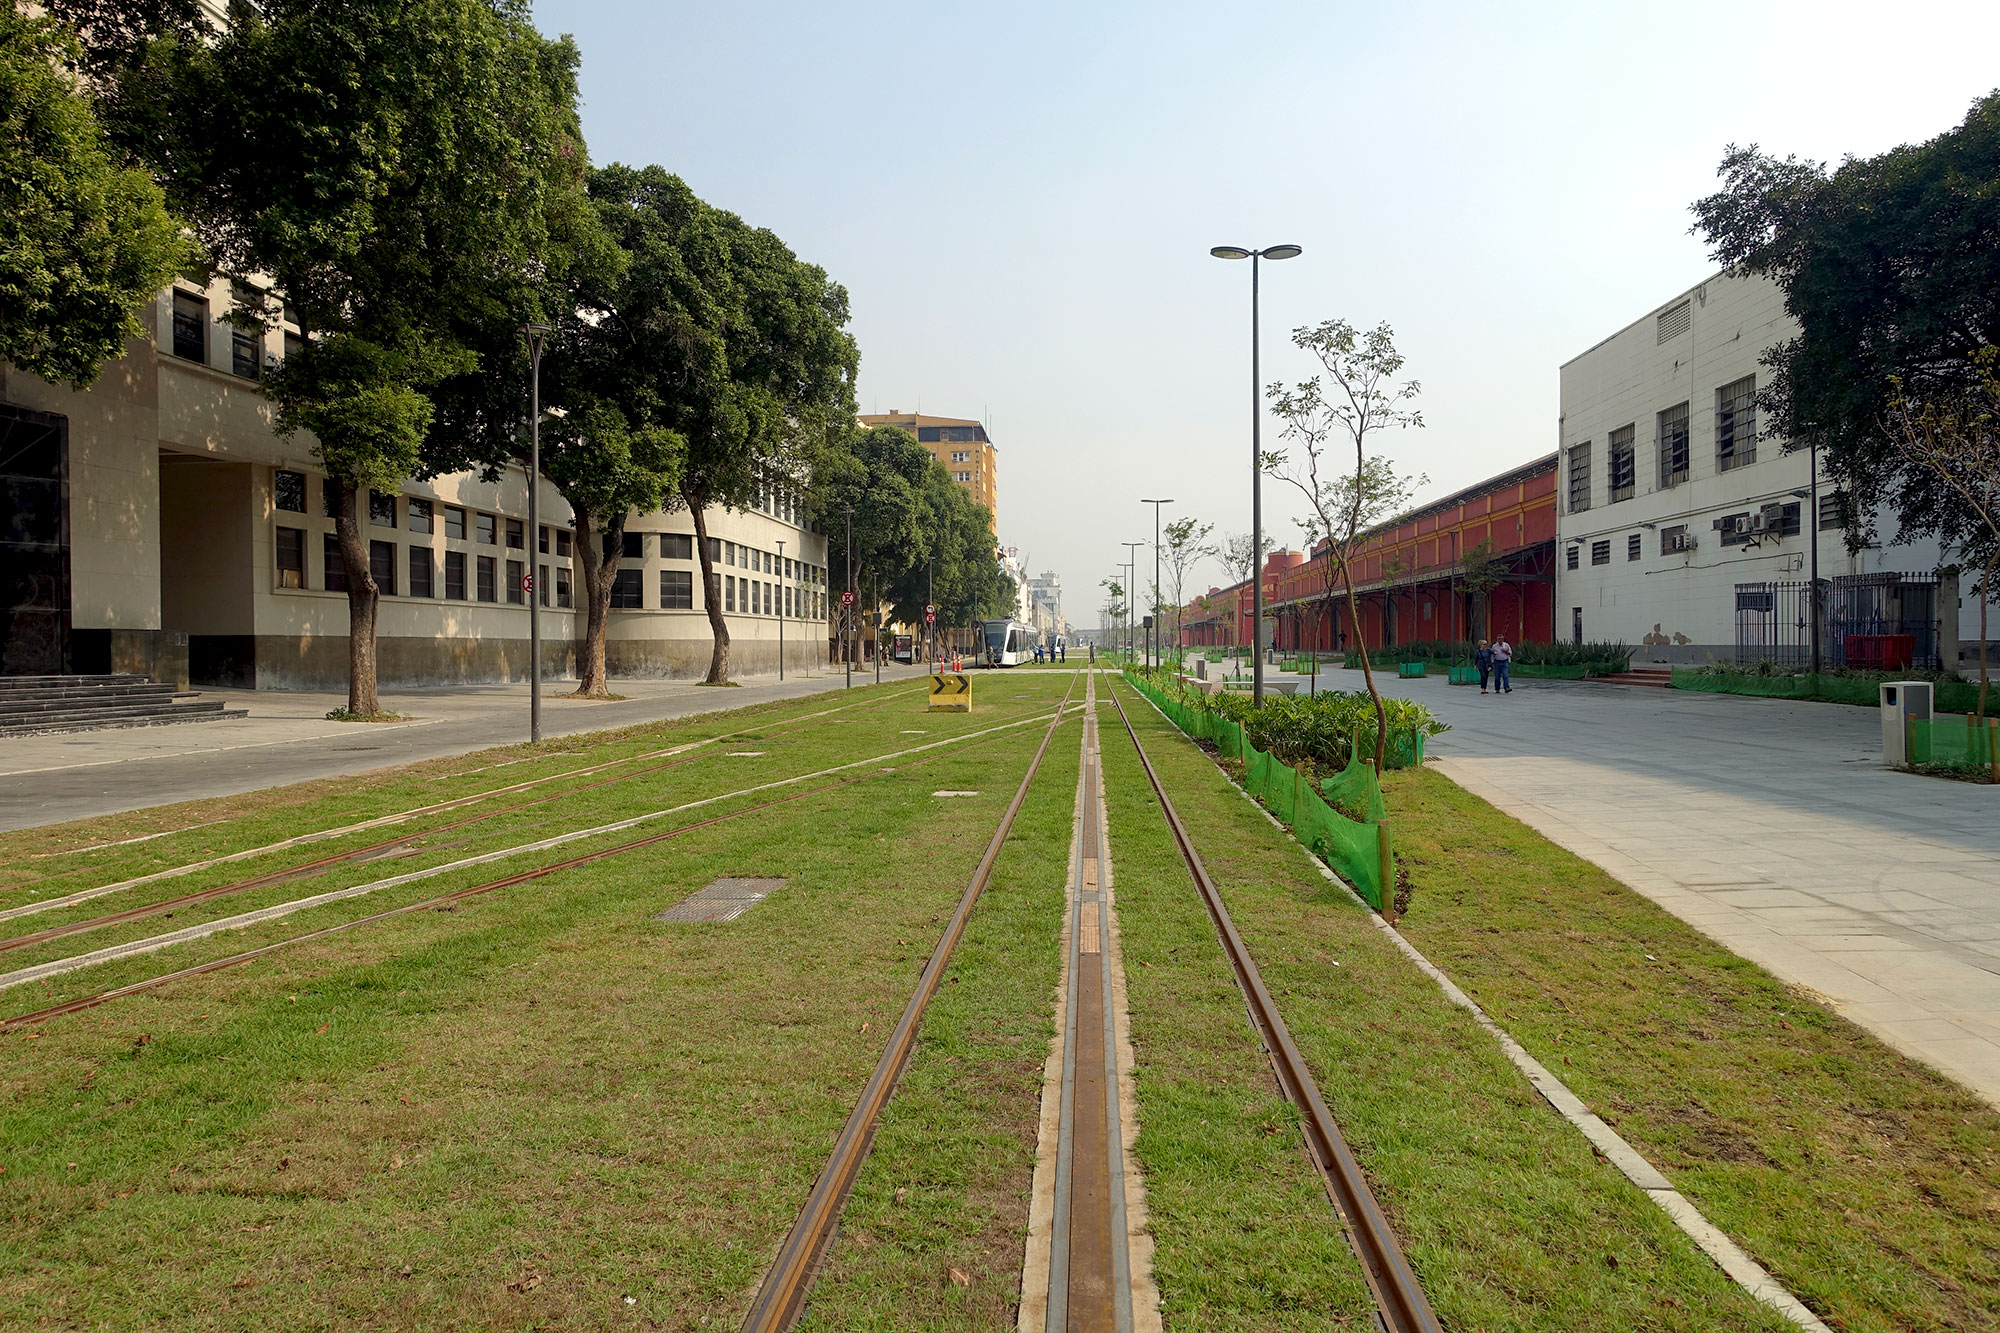 The former path of the high line became avenue for pedestrians and electric tramway